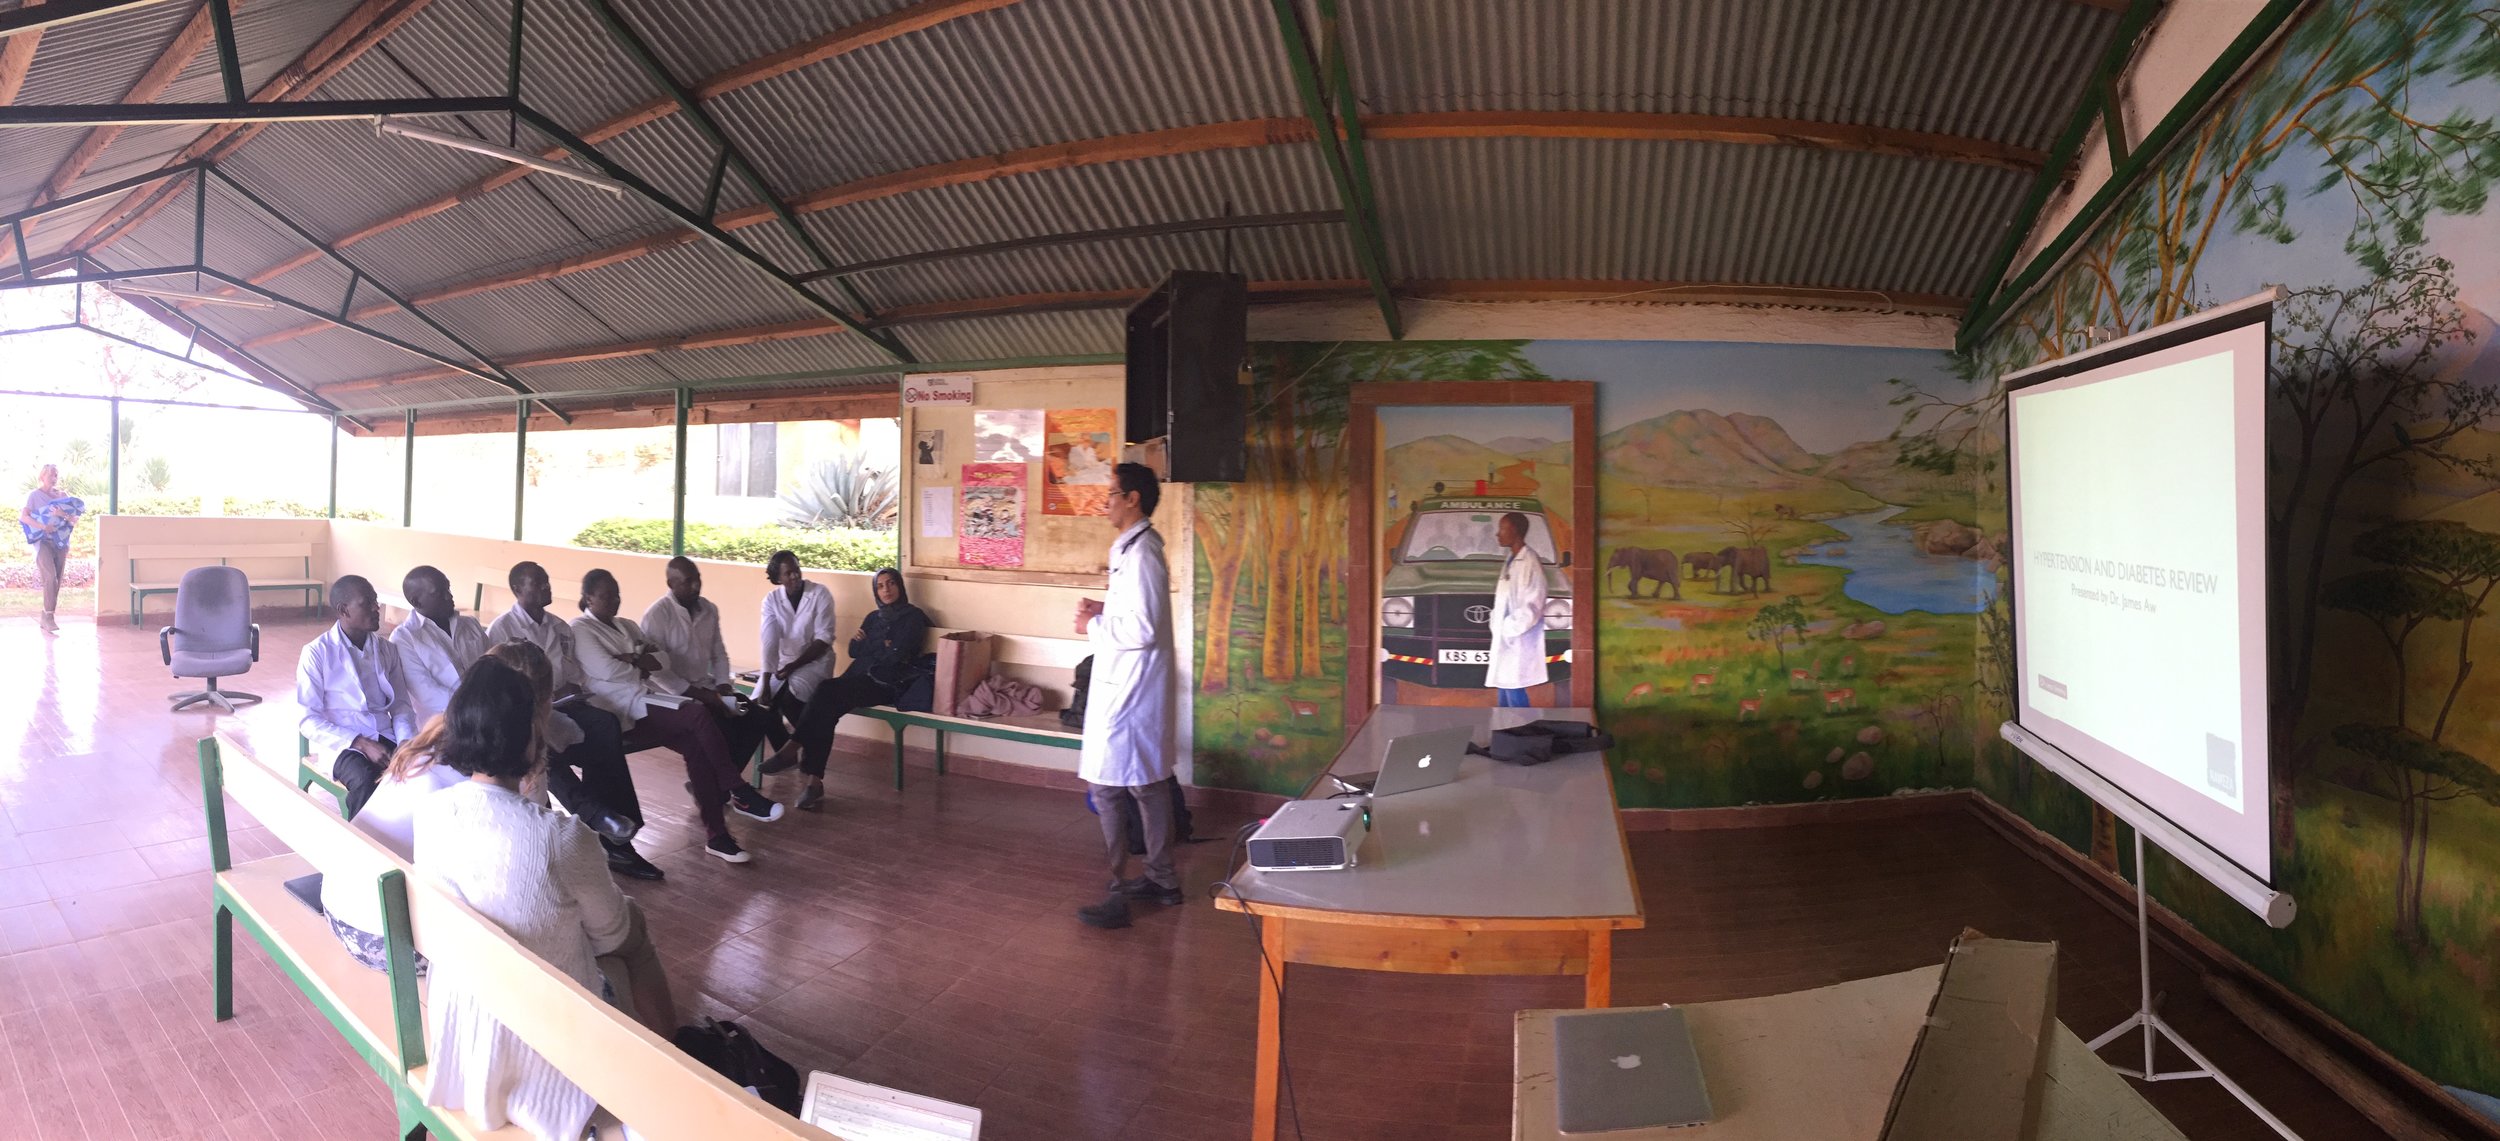 Dr. James starts off the CME sessions in a open-air lounge area on the grounds of the Lewa clinic